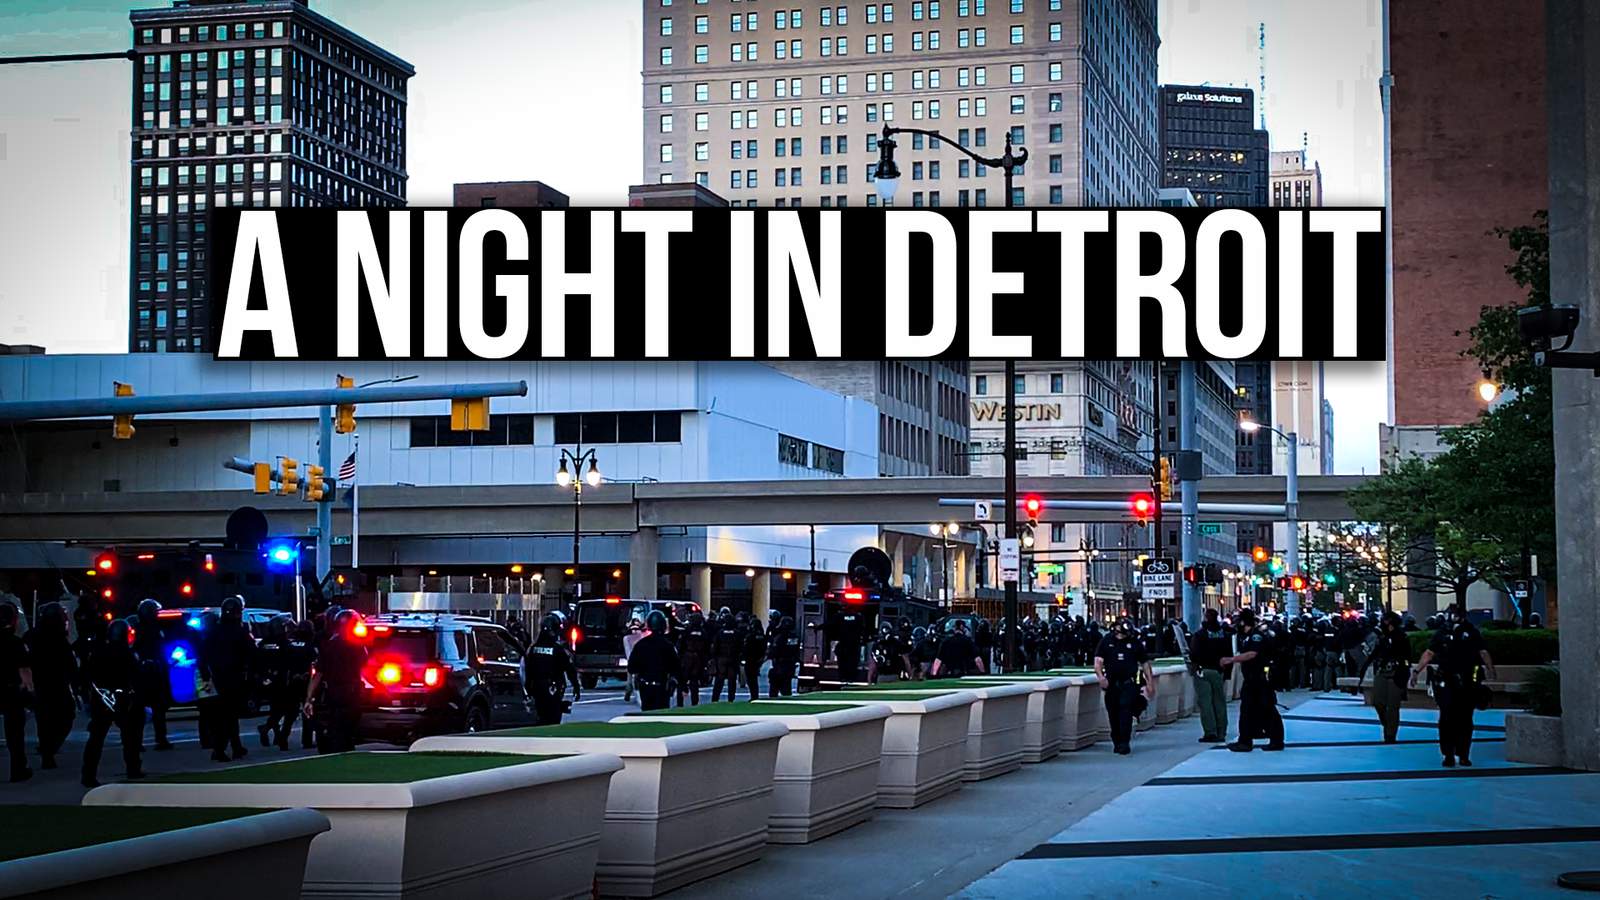 Podcast: A night in Detroit behind police lines